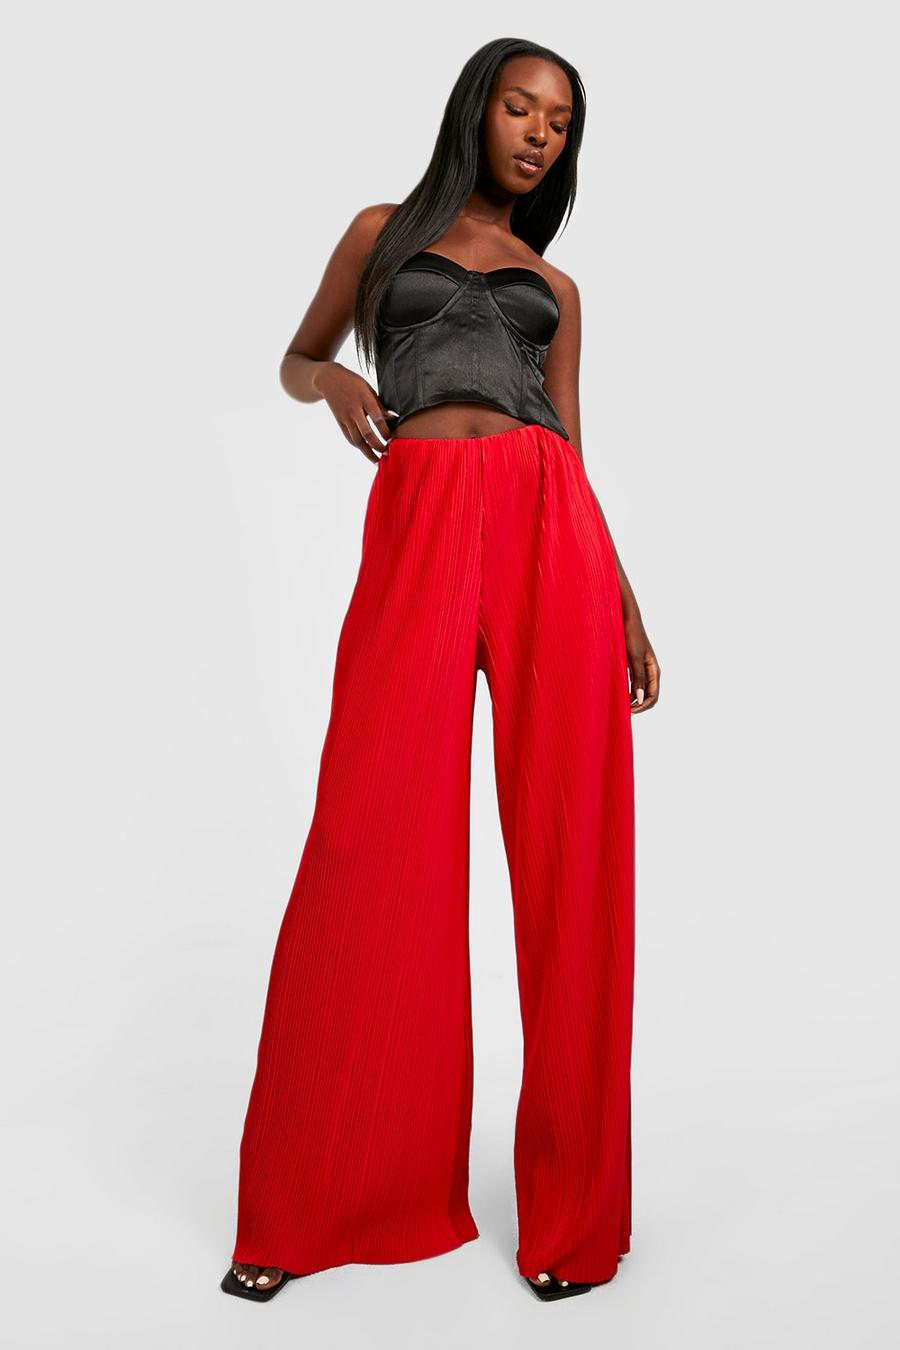 Red Plisse High Waisted Floor Length Extreme Wide Leg Pants